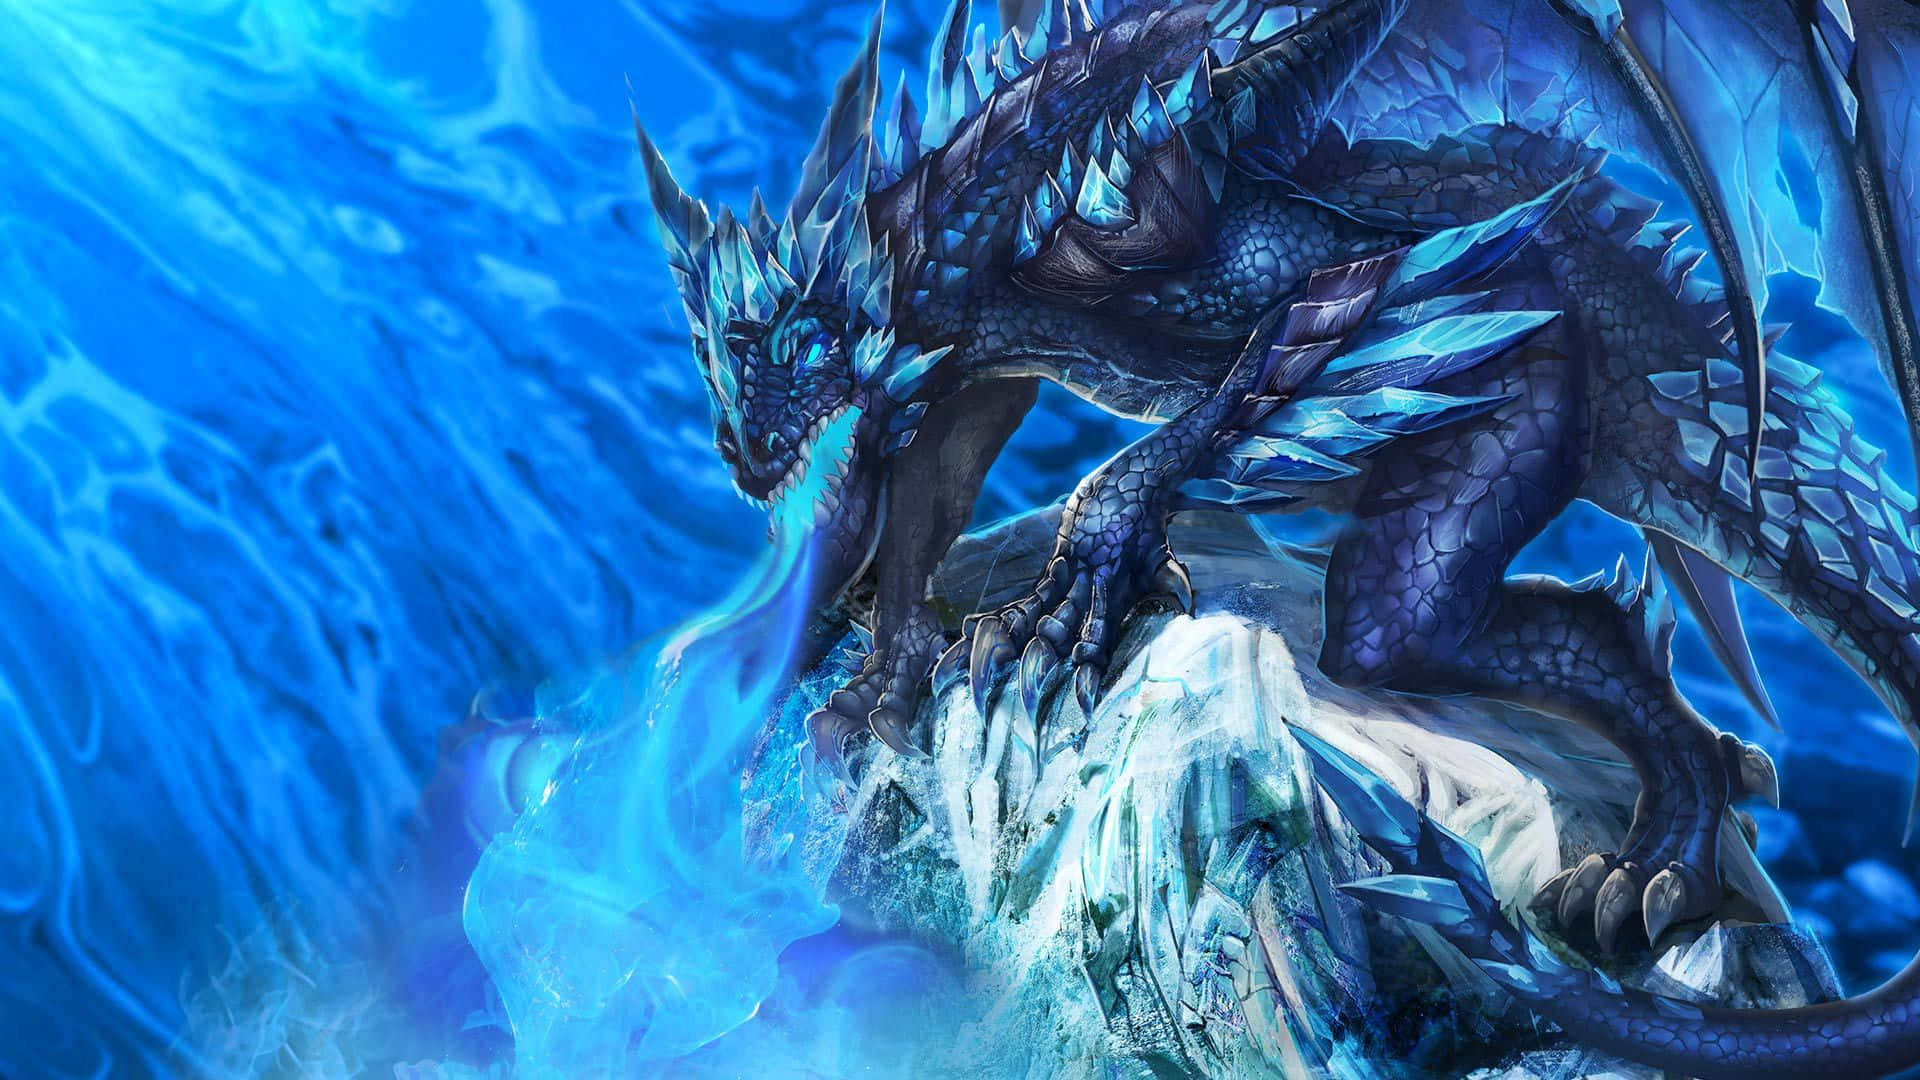 Dare to Enter the Magical Realm of the Mystical Dragon Wallpaper